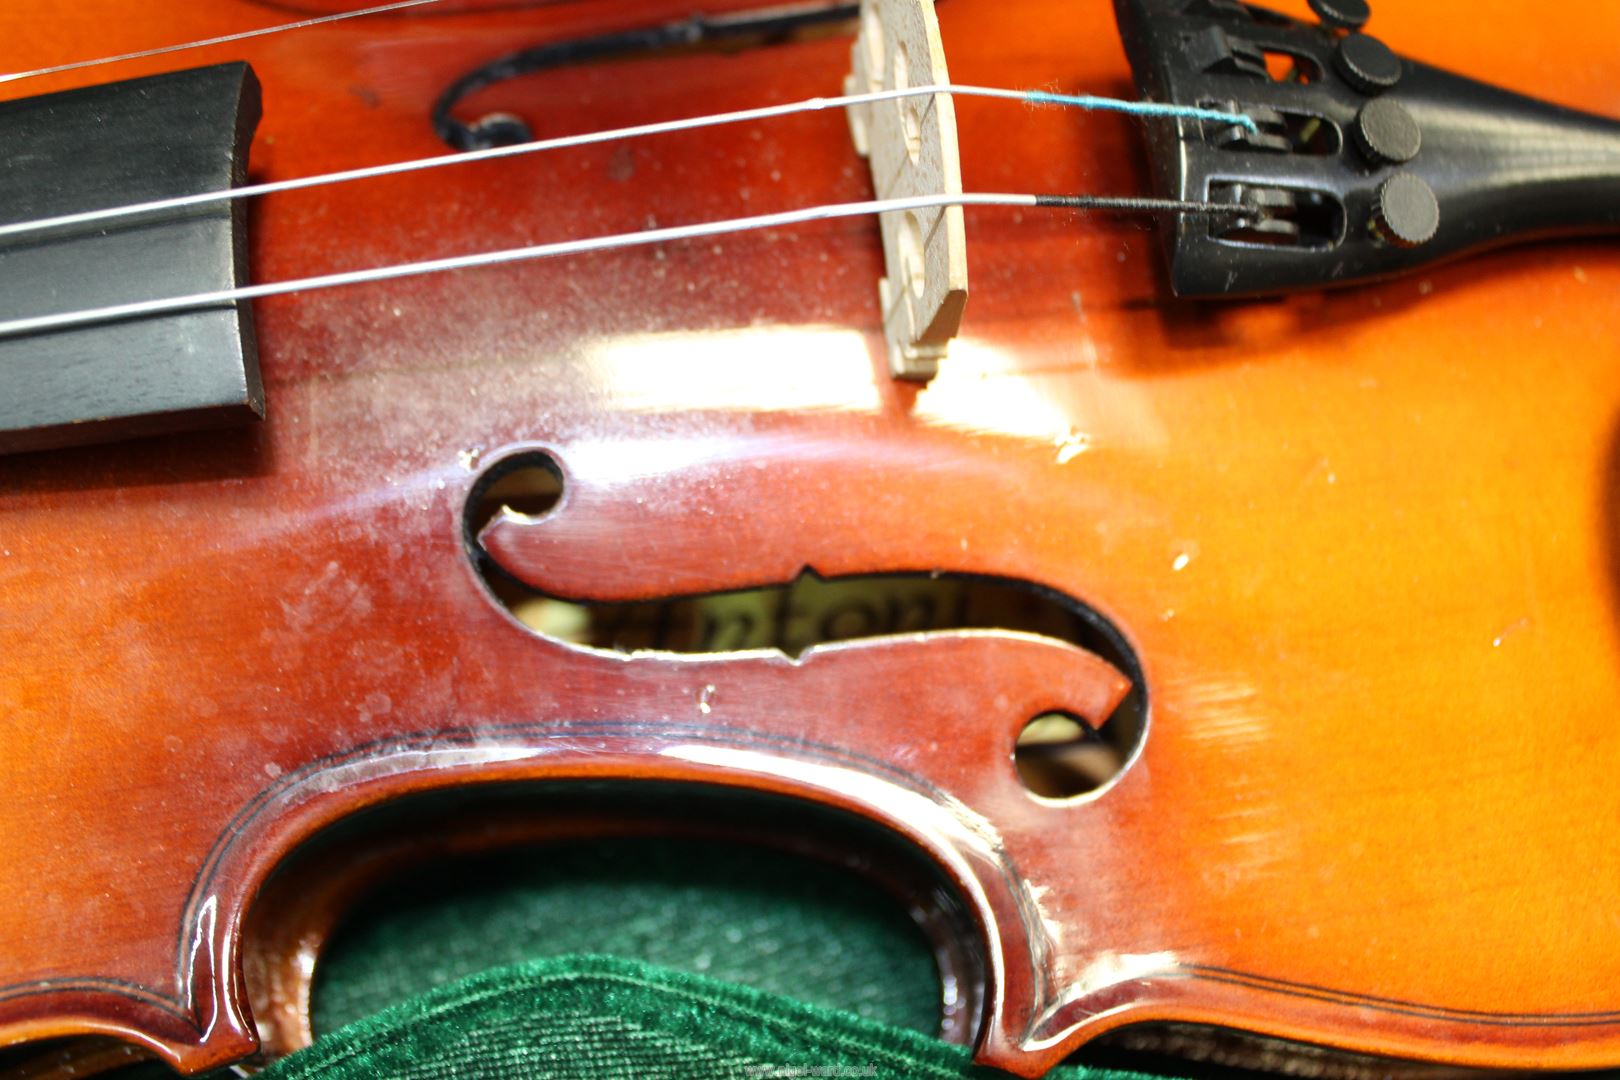 An Antoni Debut Violin in soft case, 21" long, with box, some strings missing. - Image 3 of 5